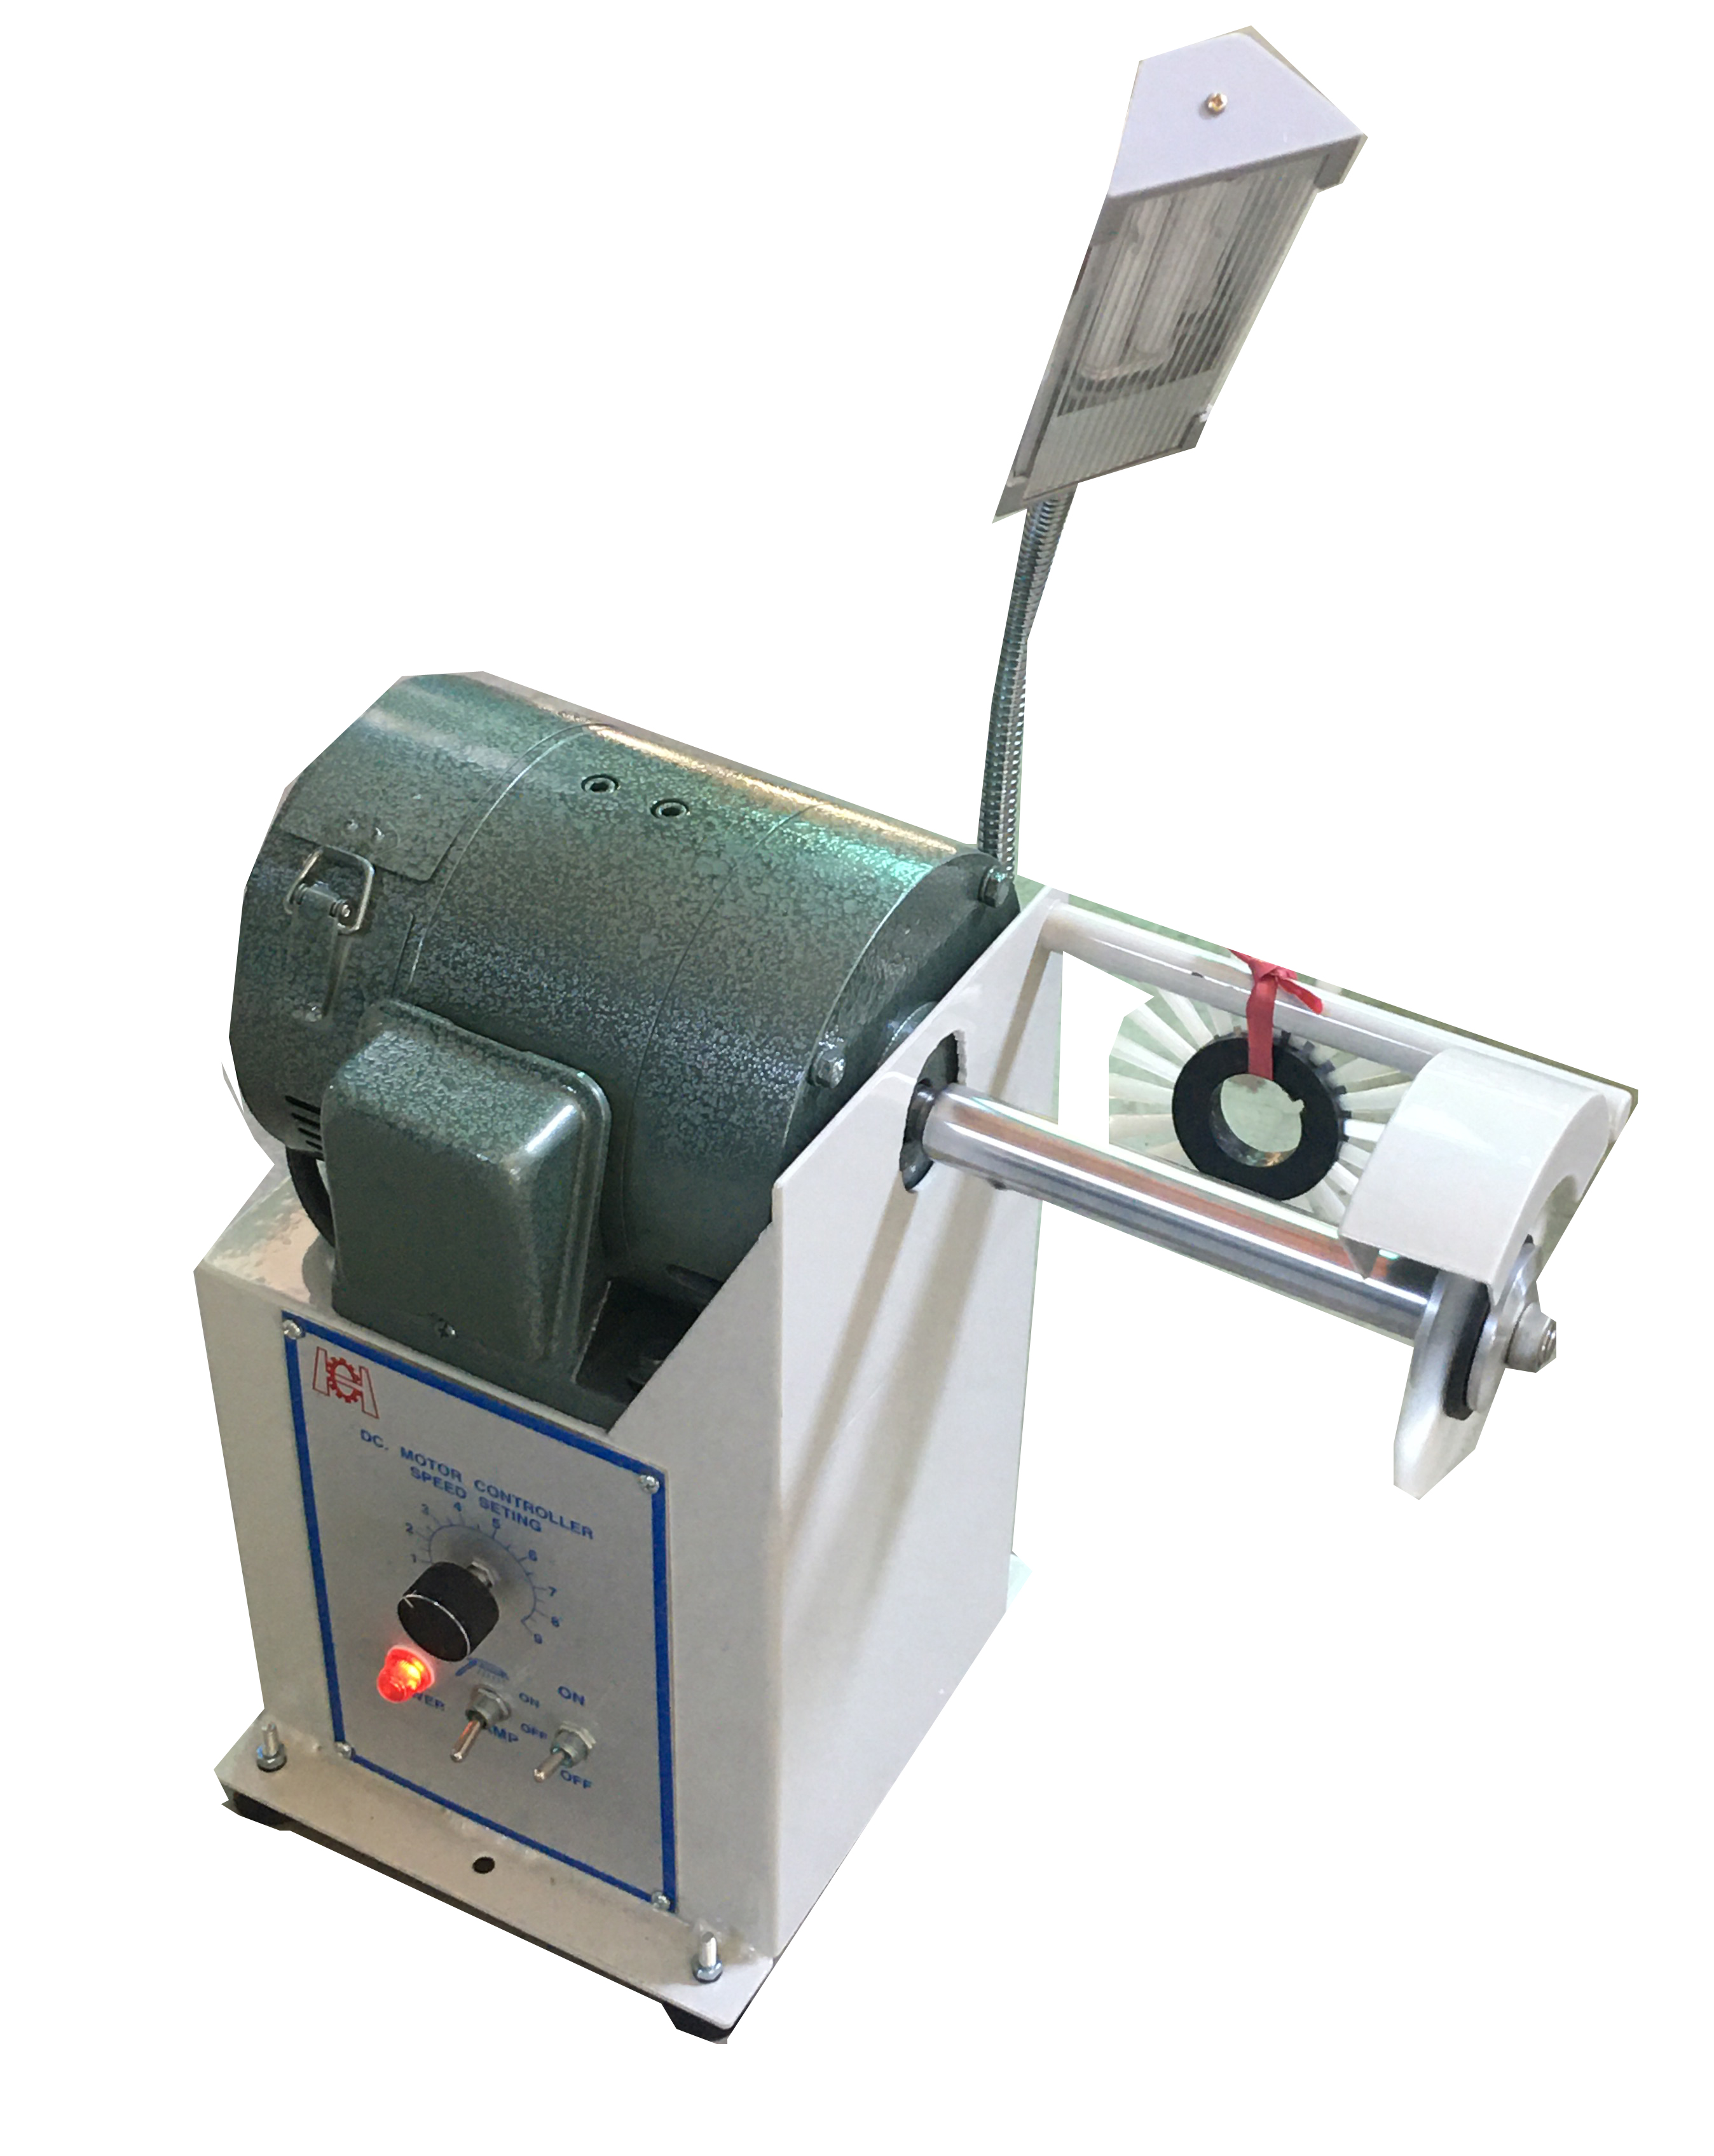 TS-970 Table Type Auto Glue-Cleaning Machine